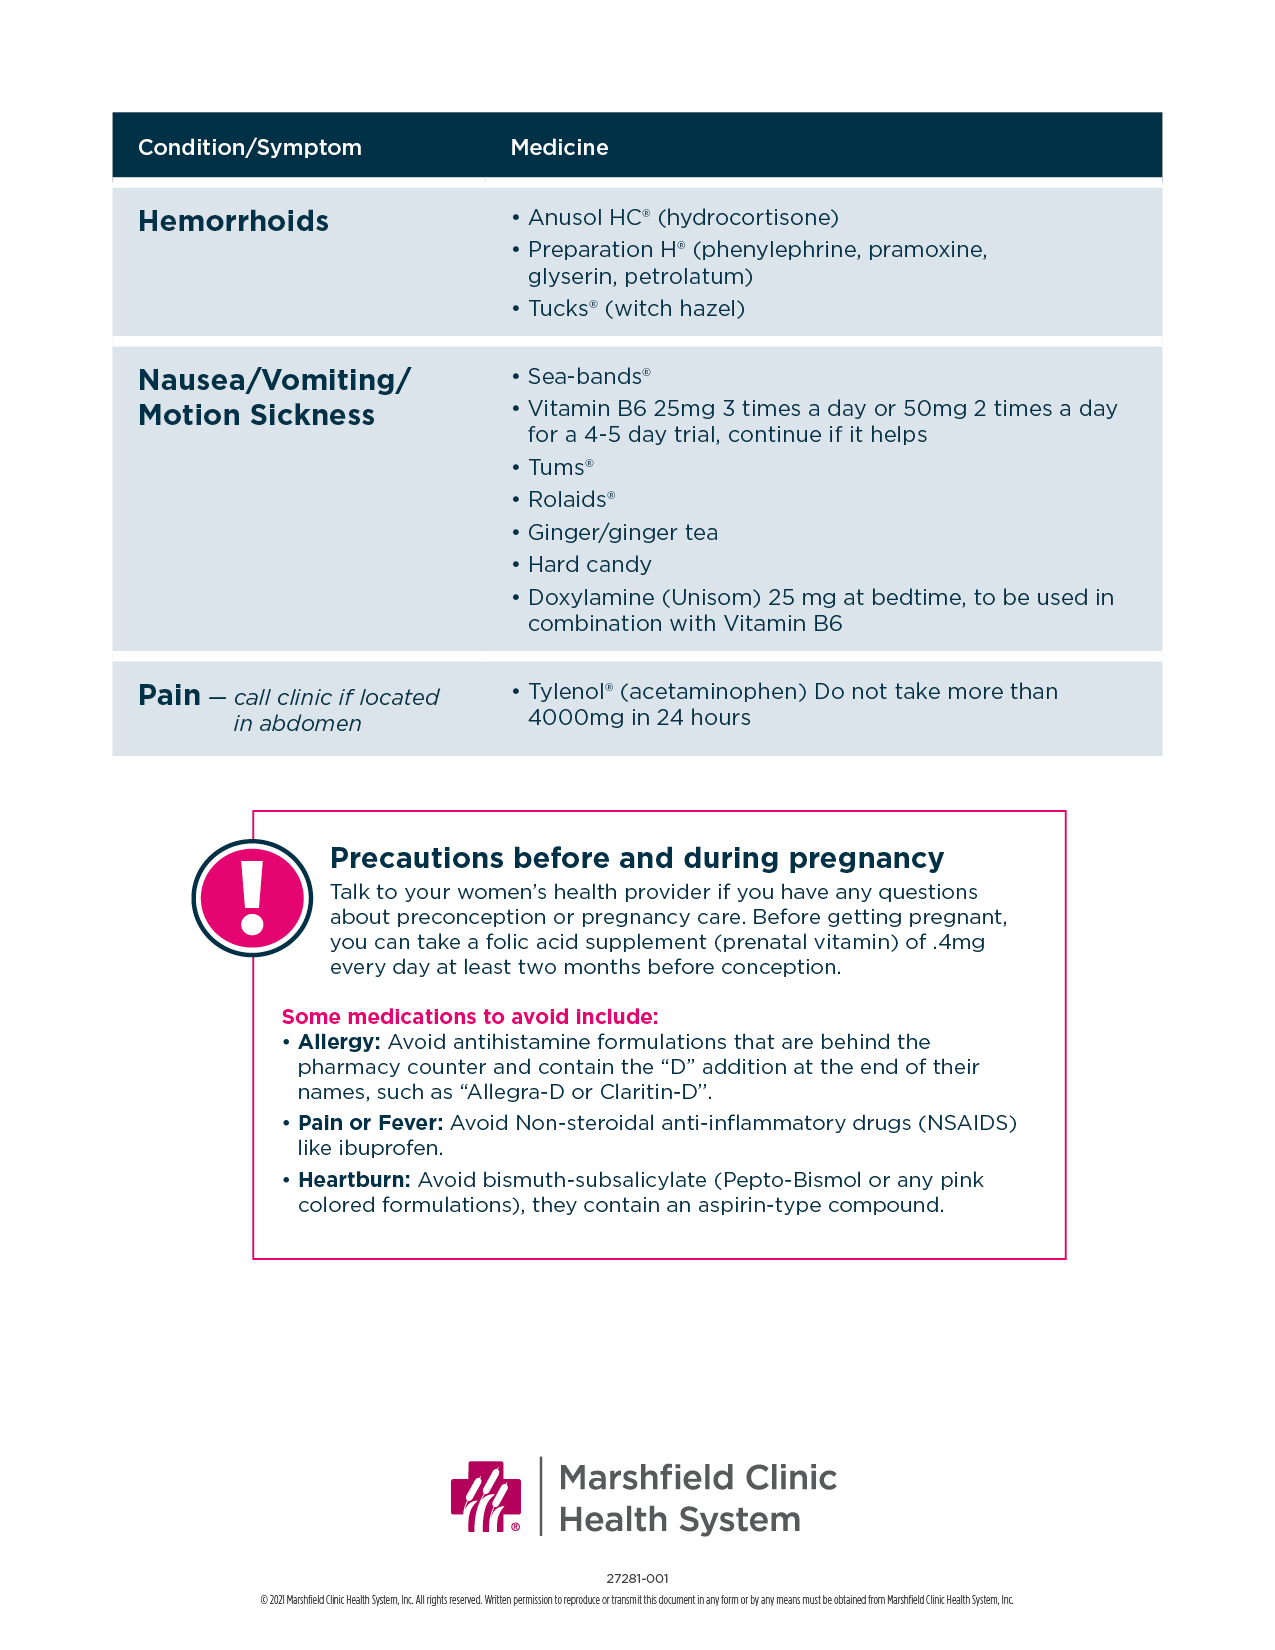 Graphic of safe medications during pregnancy 2